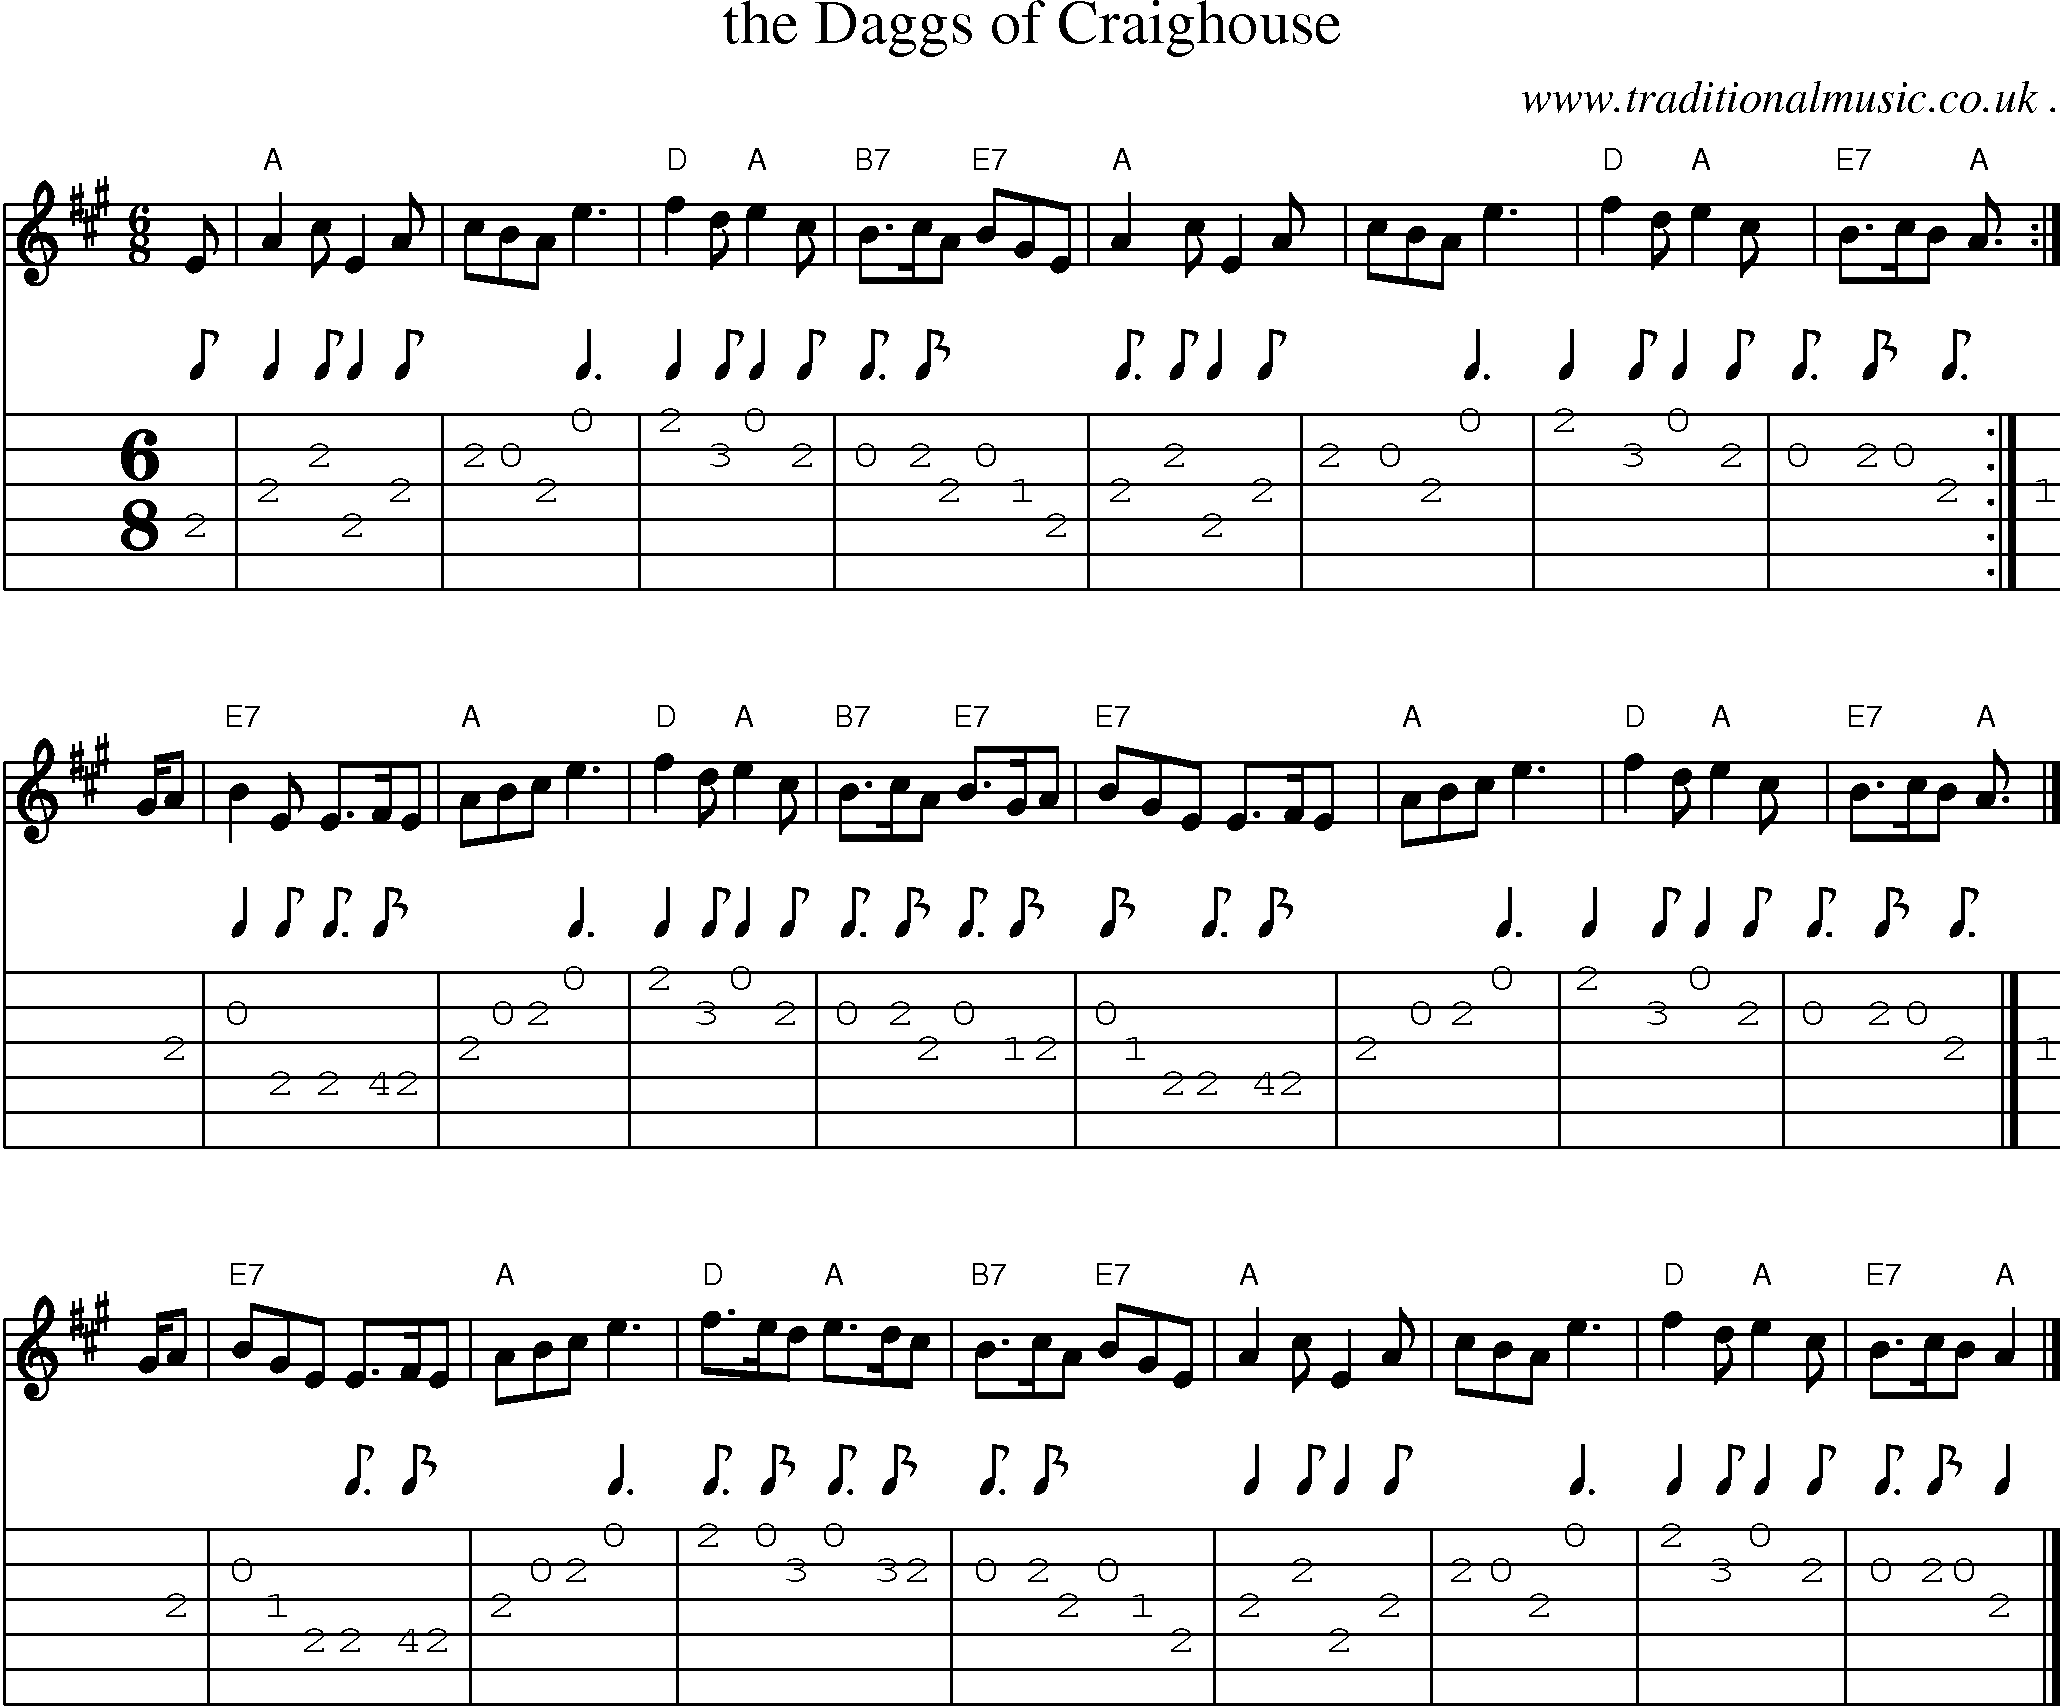 Sheet-music  score, Chords and Guitar Tabs for The Daggs Of Craighouse